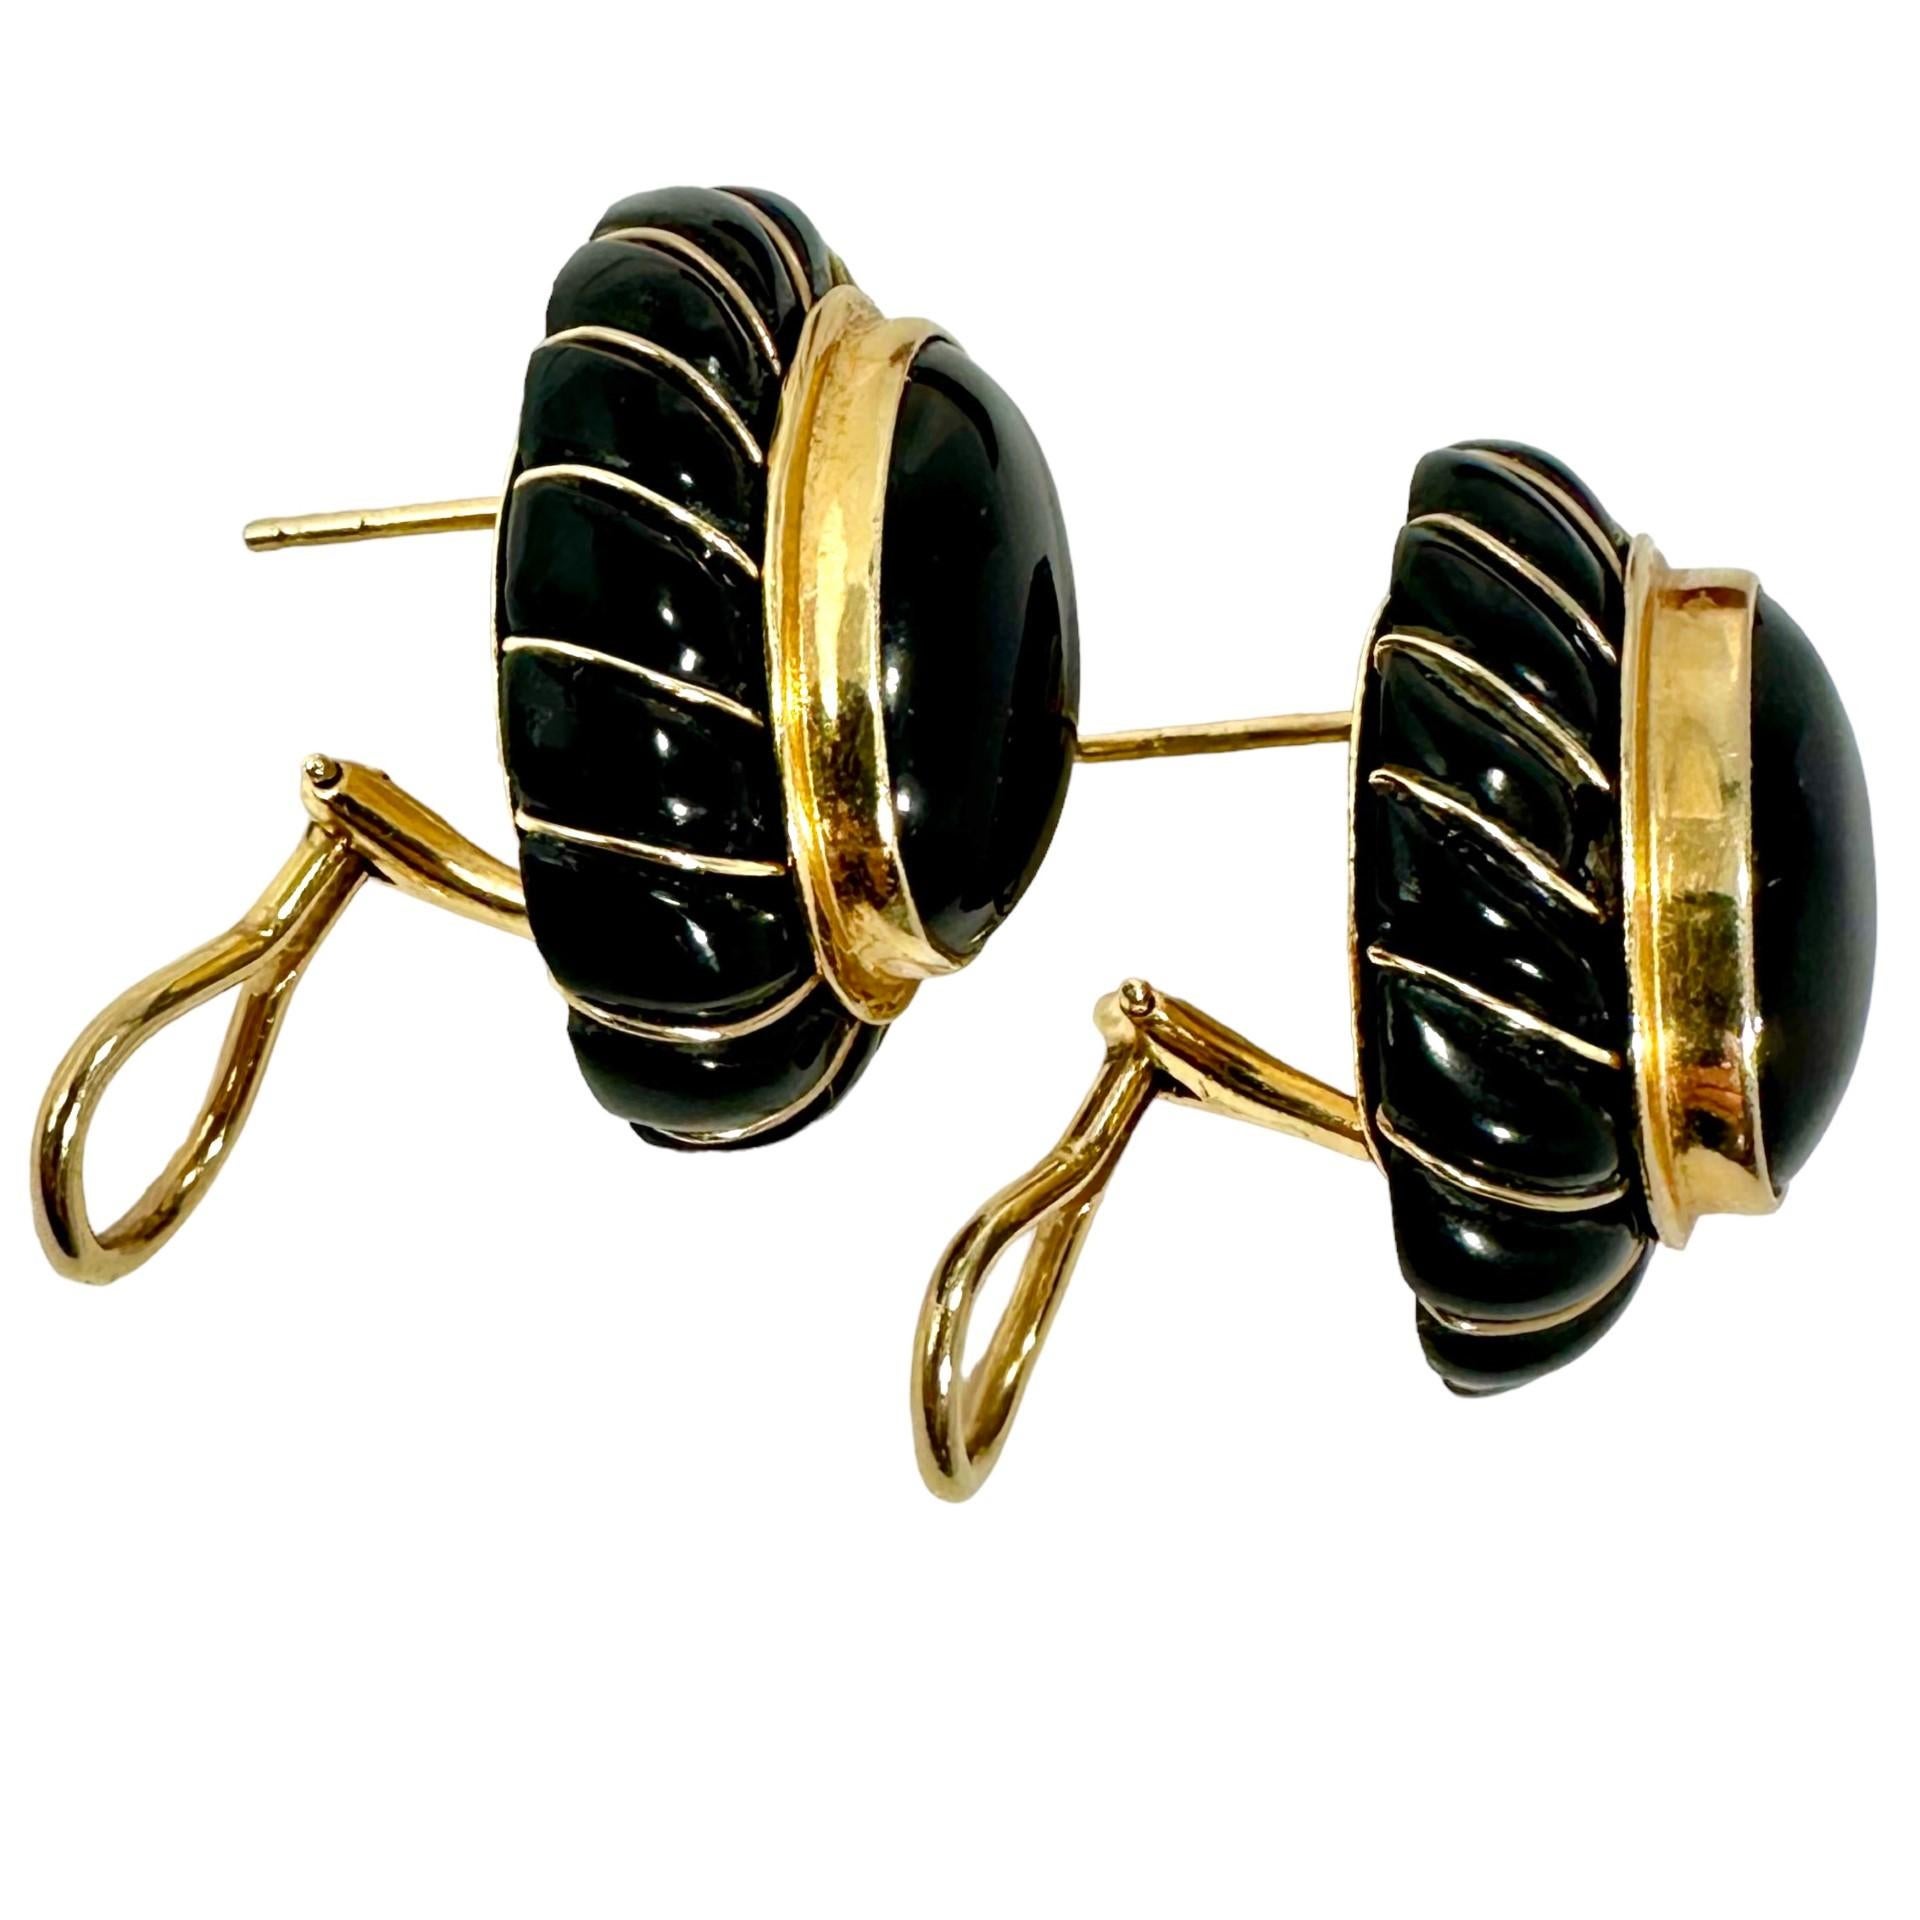 Modern Tailored, Vintage 14K Gold and Black Onyx Oval Shaped Earrings by Designer Maz